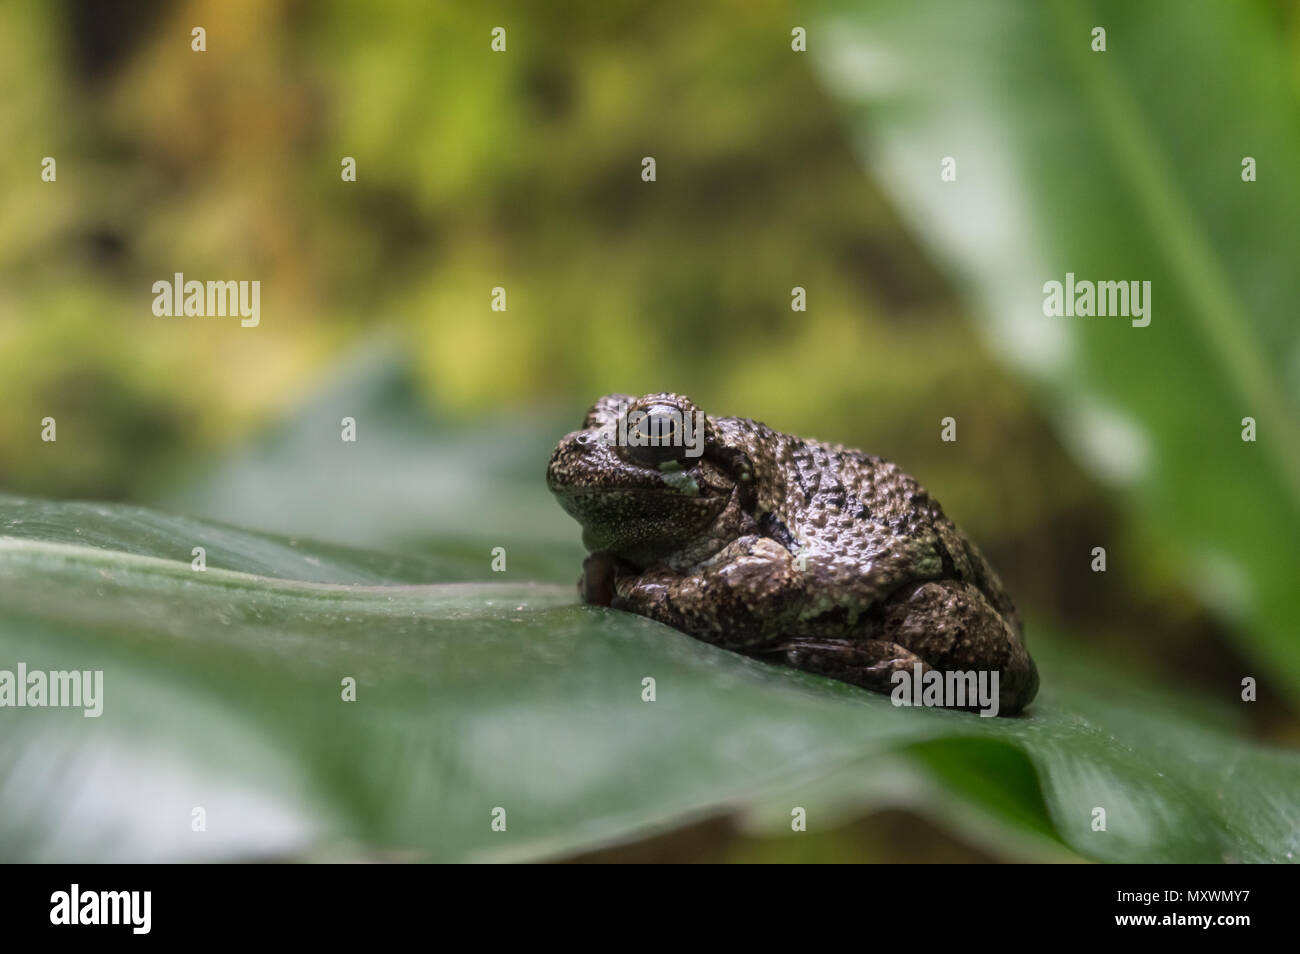 Tiny frog on a green leaf Stock Photo